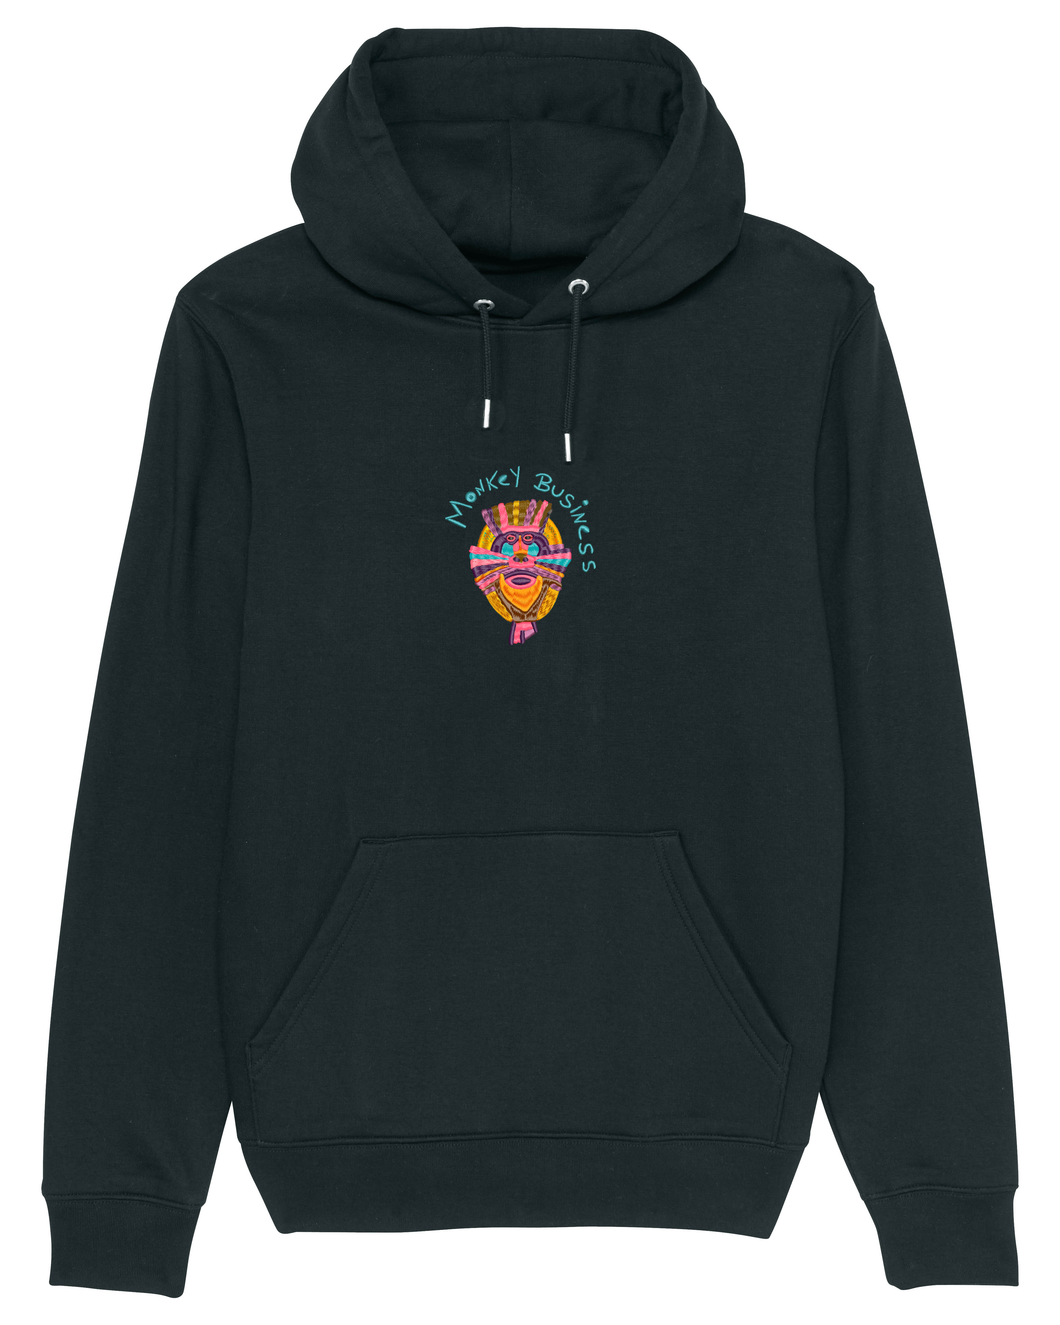 Monkey business 🐵 - Embroidered unisex hoodie